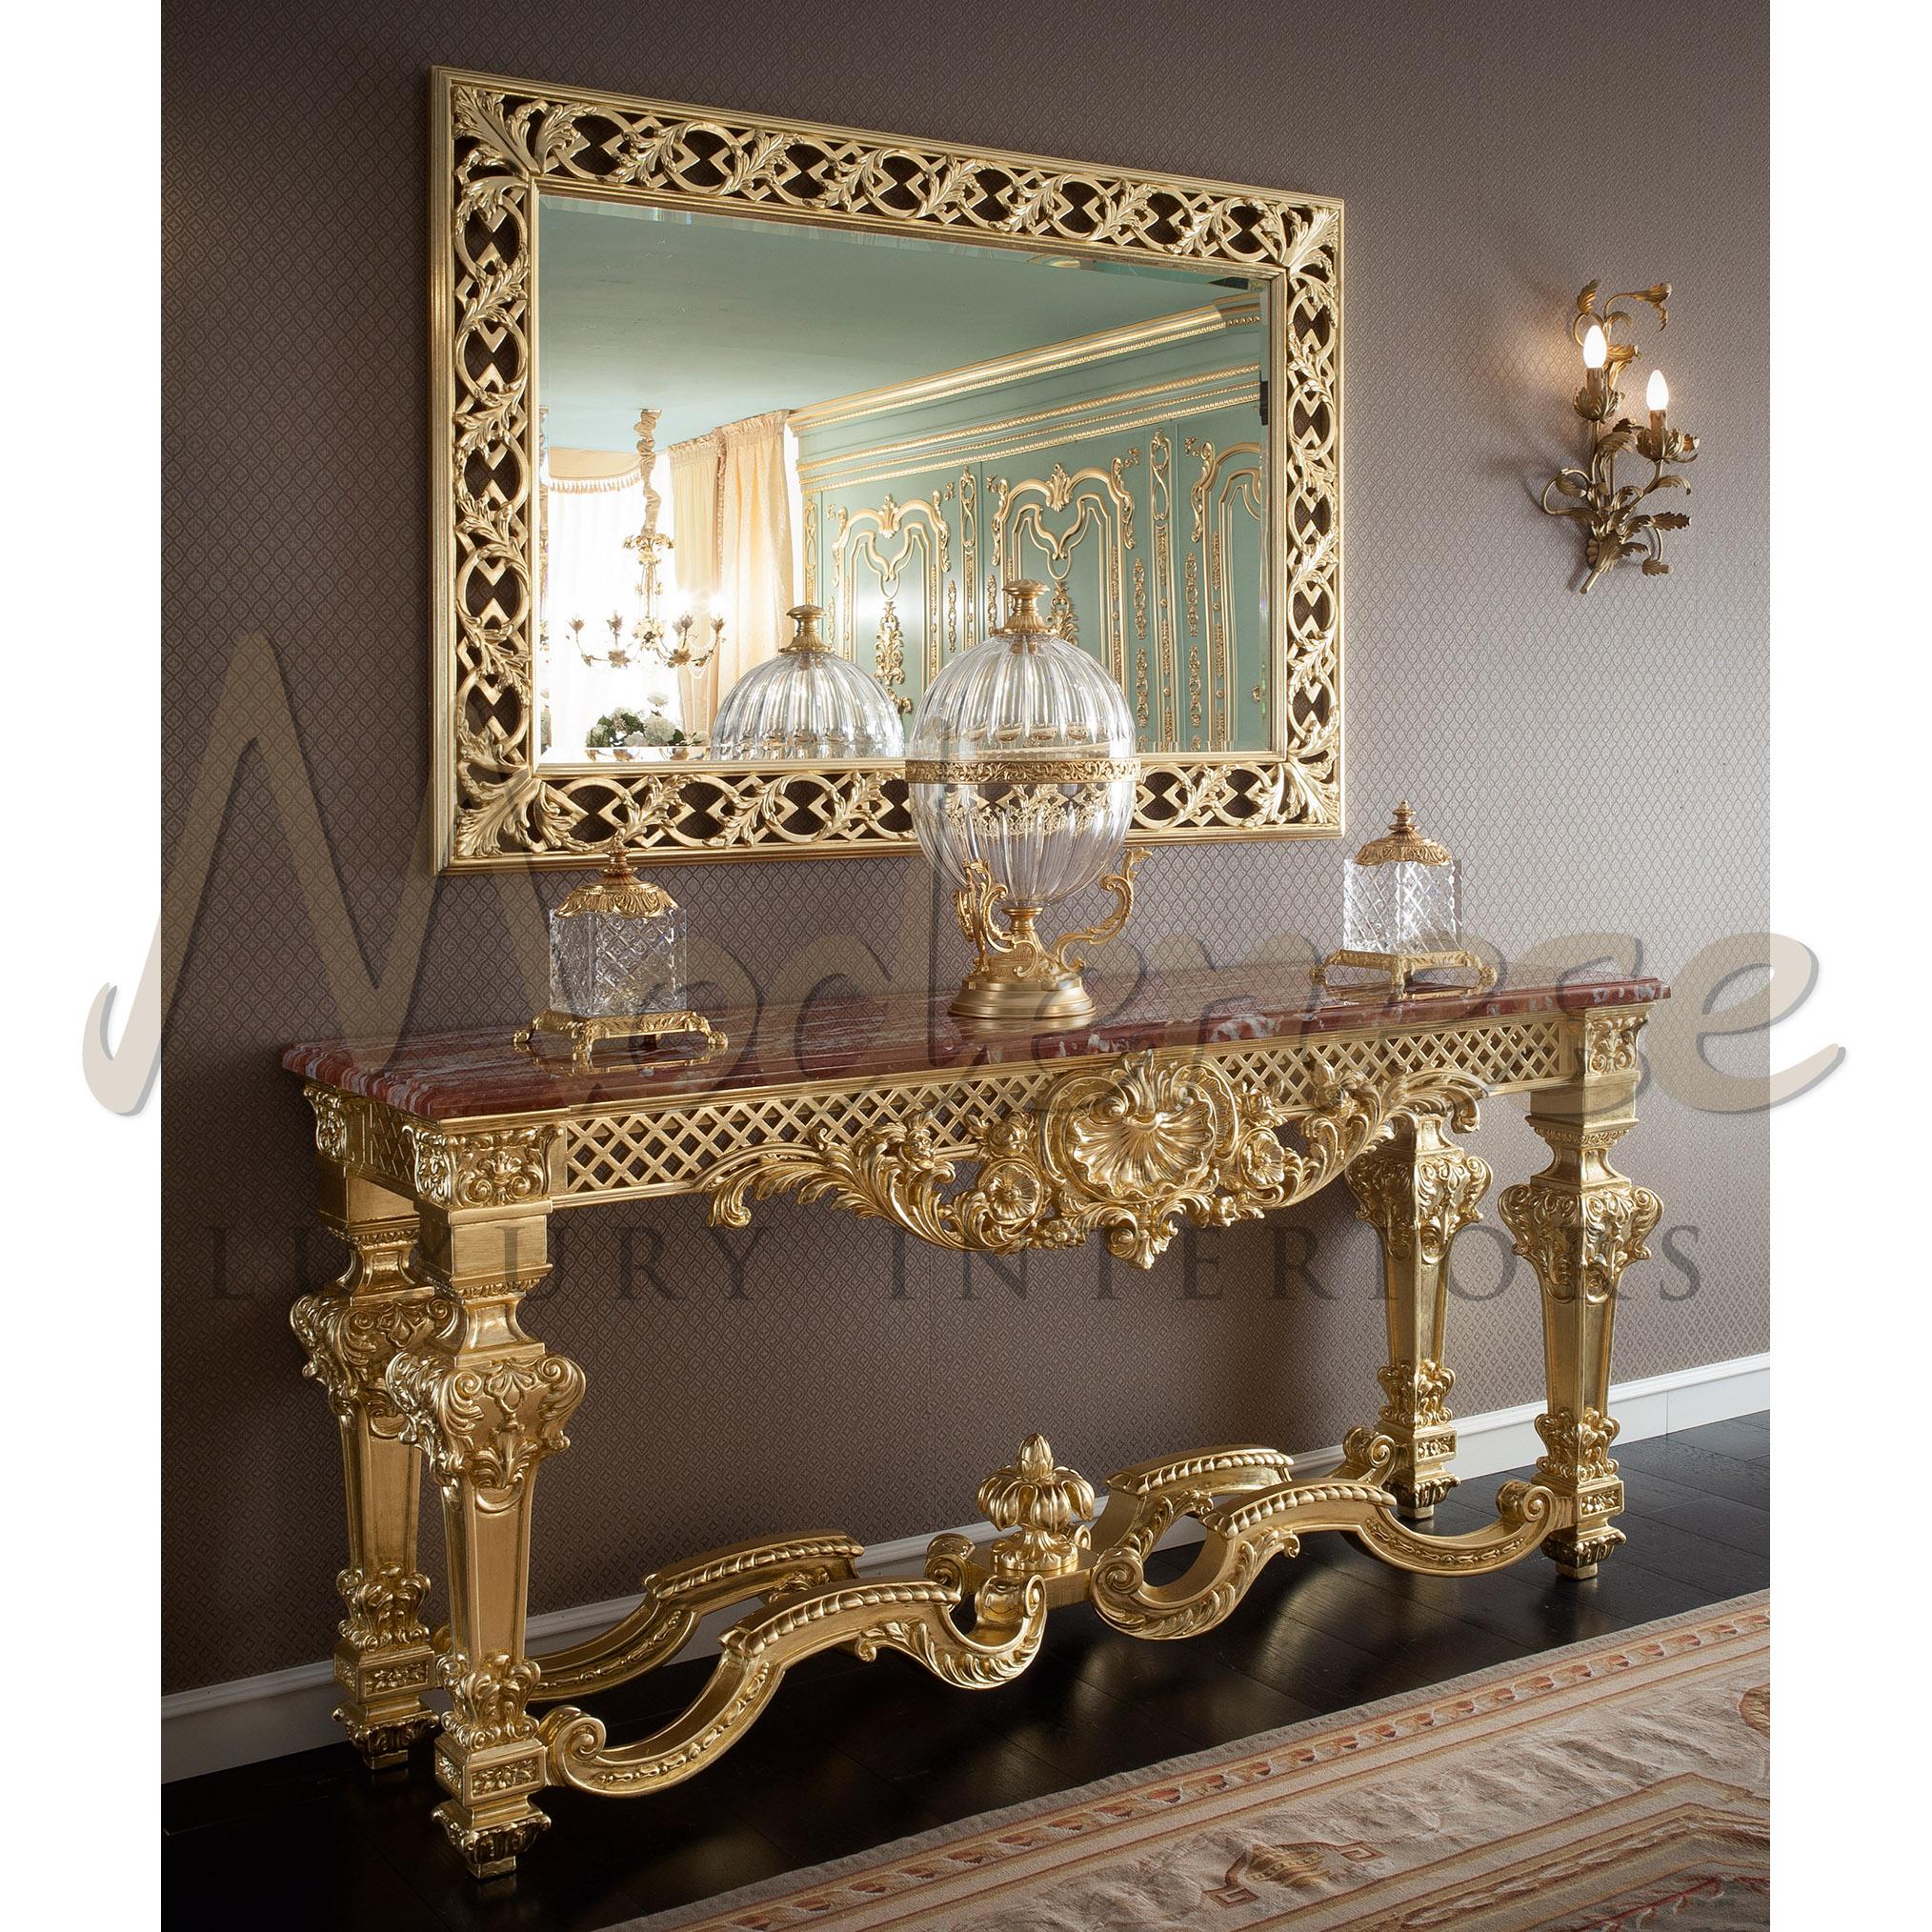 Turn your private villa in a wonders museum with this unique Modenese Interiors gold leaf baroque console. The selected item goes with a full 24kt gold leaf finishing and handmade carvings. Its structure has been purposely designed to reflect shiny